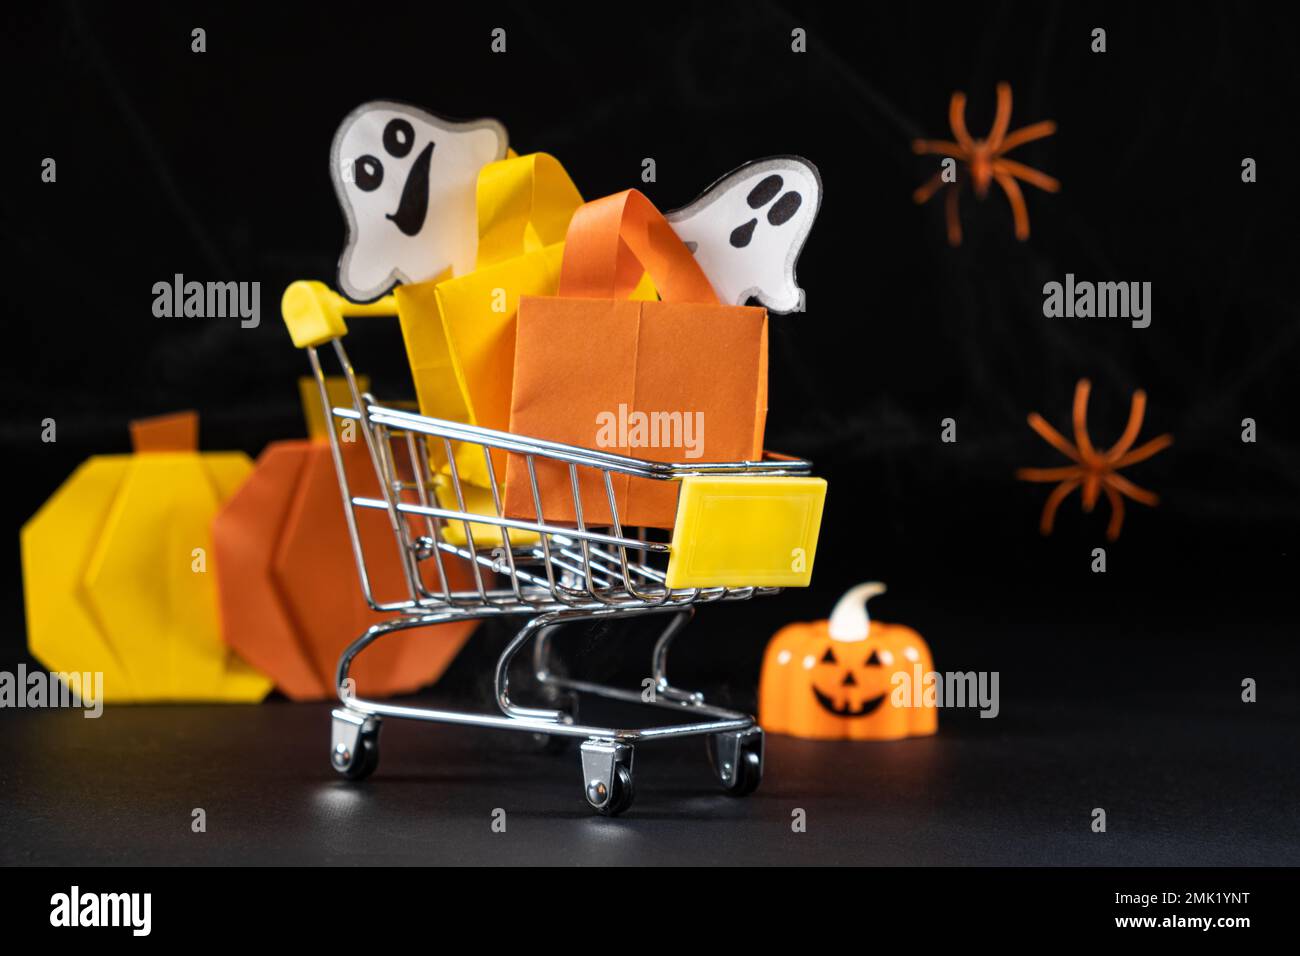 A small cart with bags, gifts on the background of pumpkins, spider webs and spiders. Halloween Sale Stock Photo